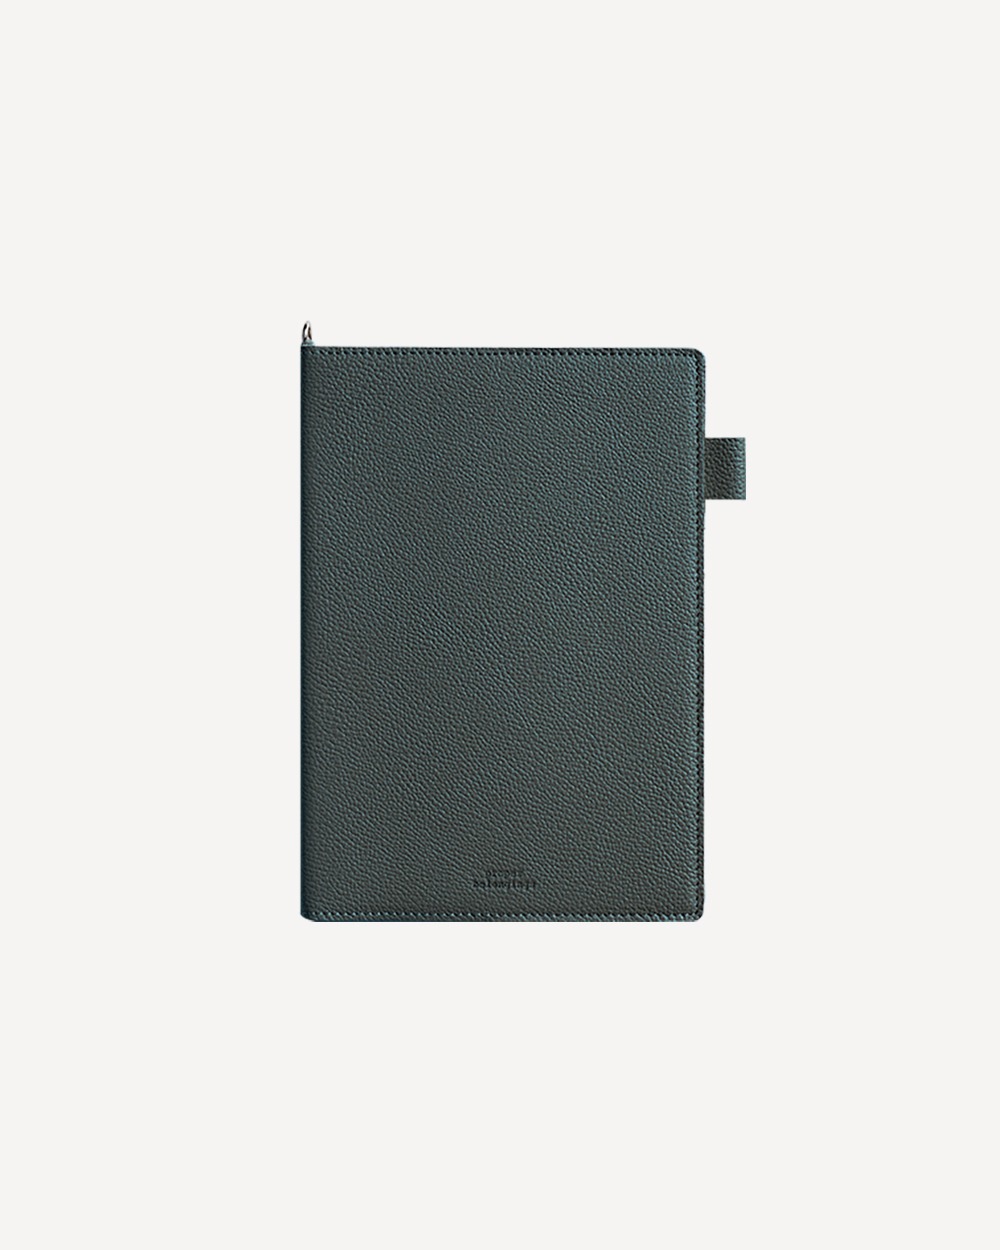 Proper Leather Cover (B6) / Greenery charcoal